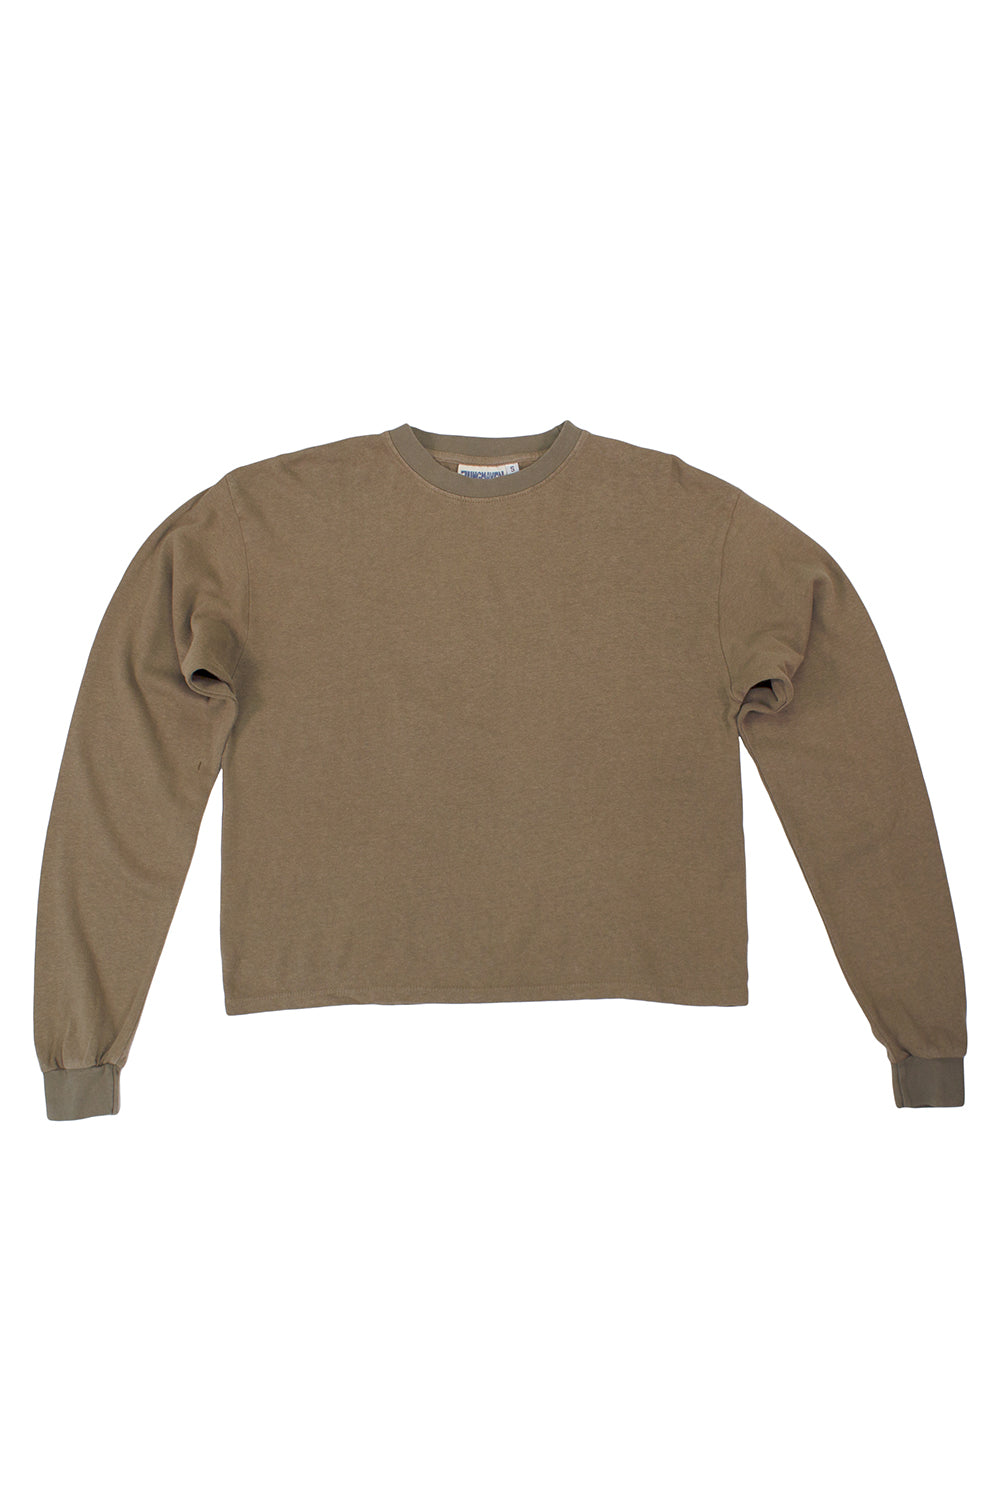 Cropped Long Sleeve Tee | Jungmaven Hemp Clothing & Accessories / Color: Coyote